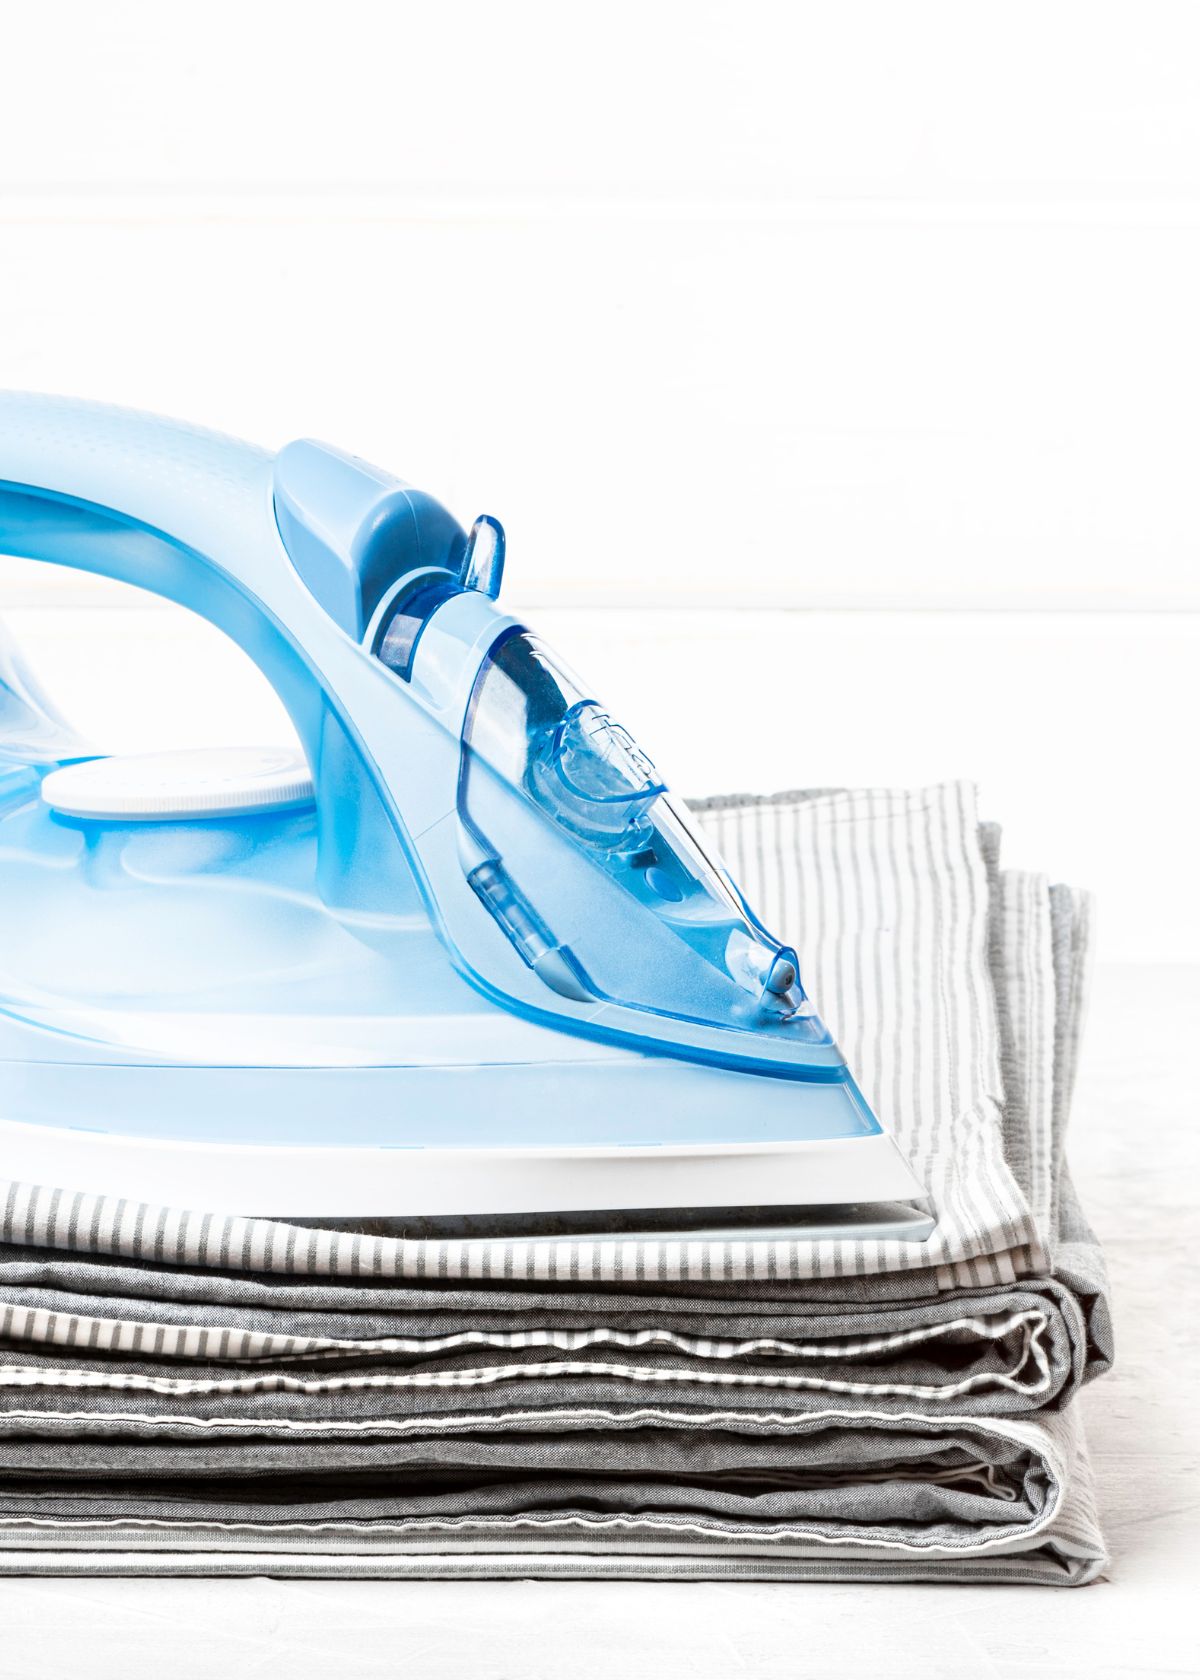 How to Iron Linen